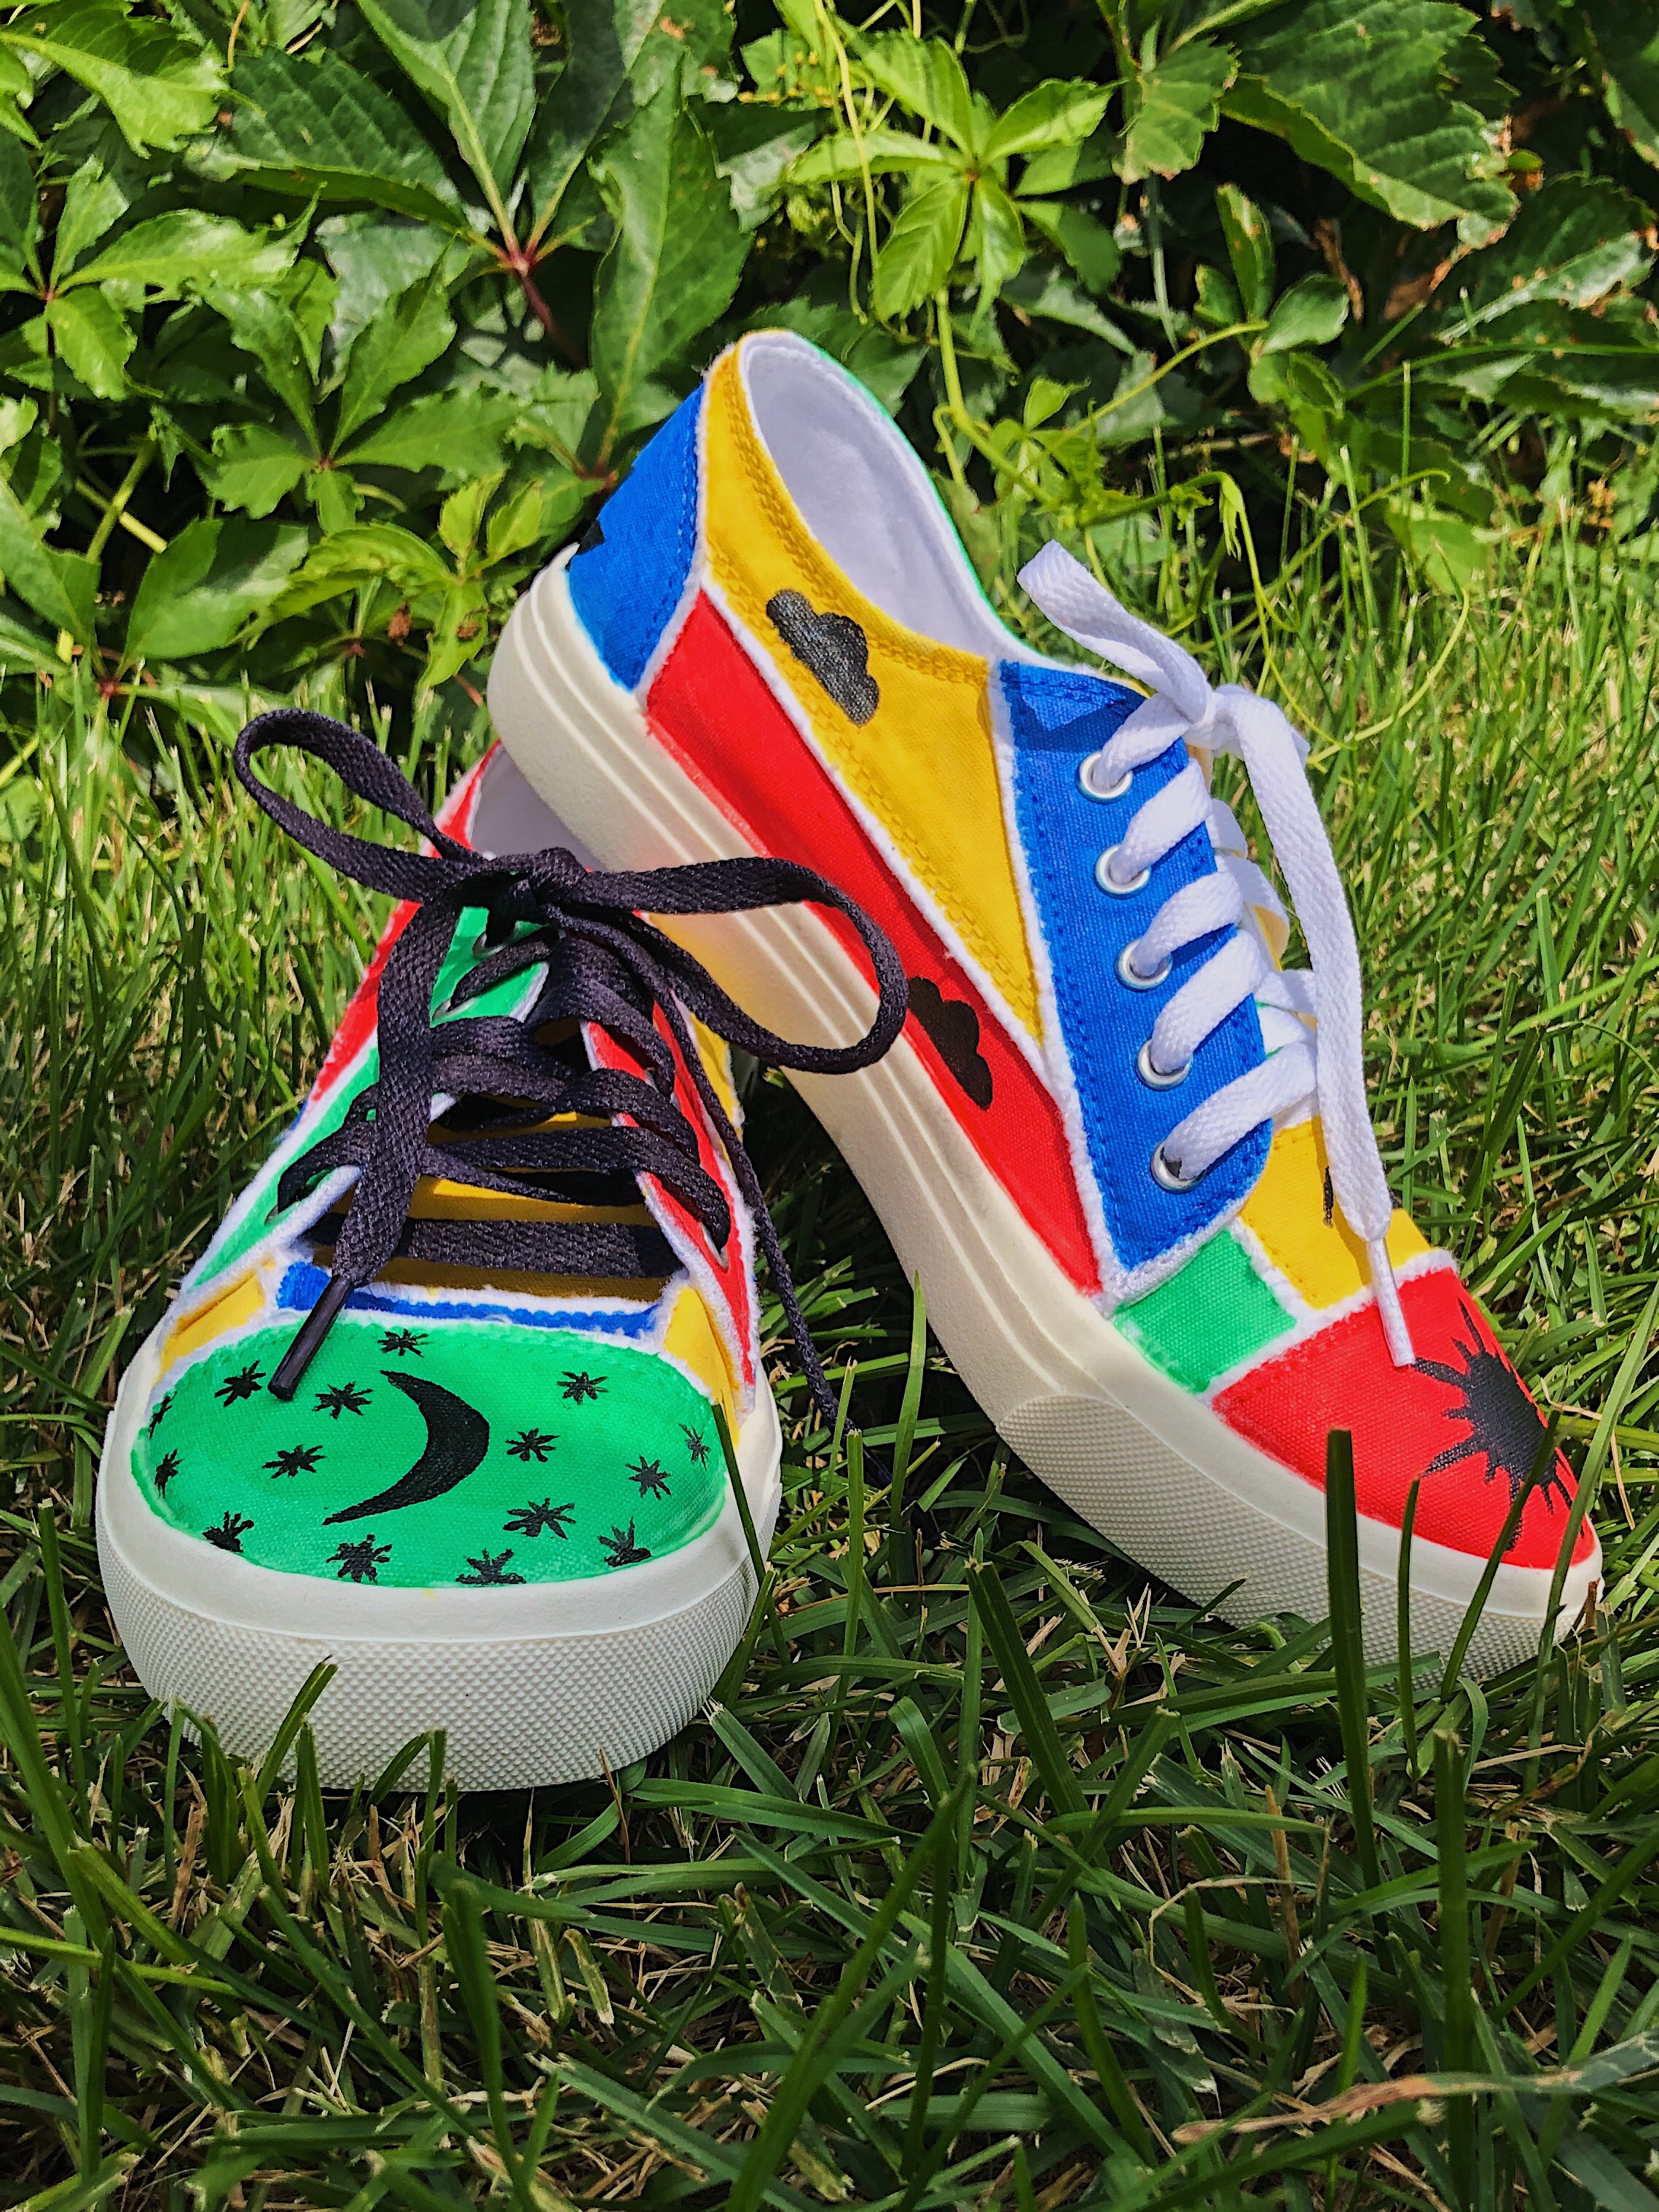 A pair of rainbow painted shoes.